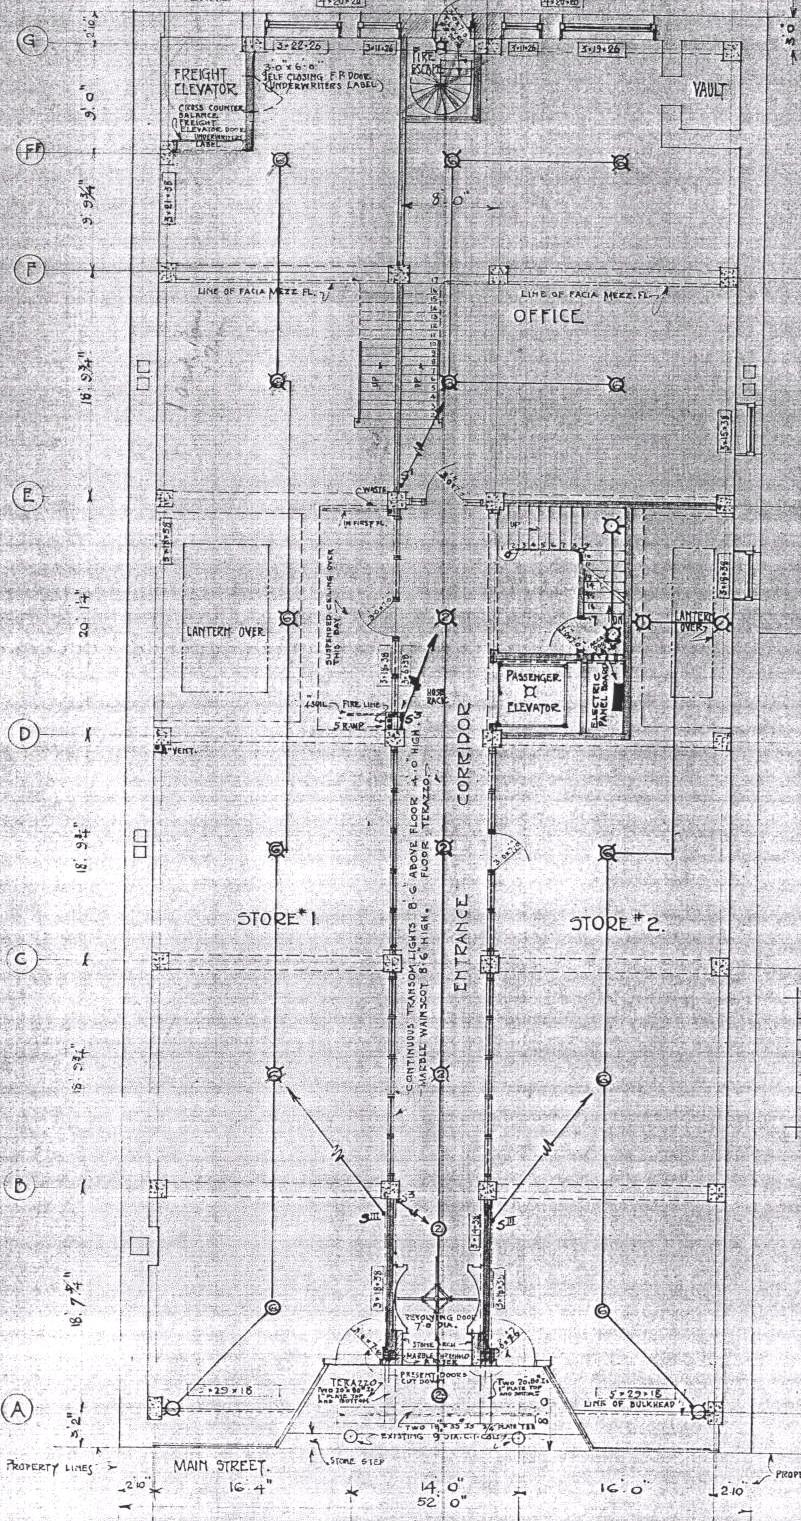 Plate 26 Architect s Plans, Ground Floor Plan, dated May 14,